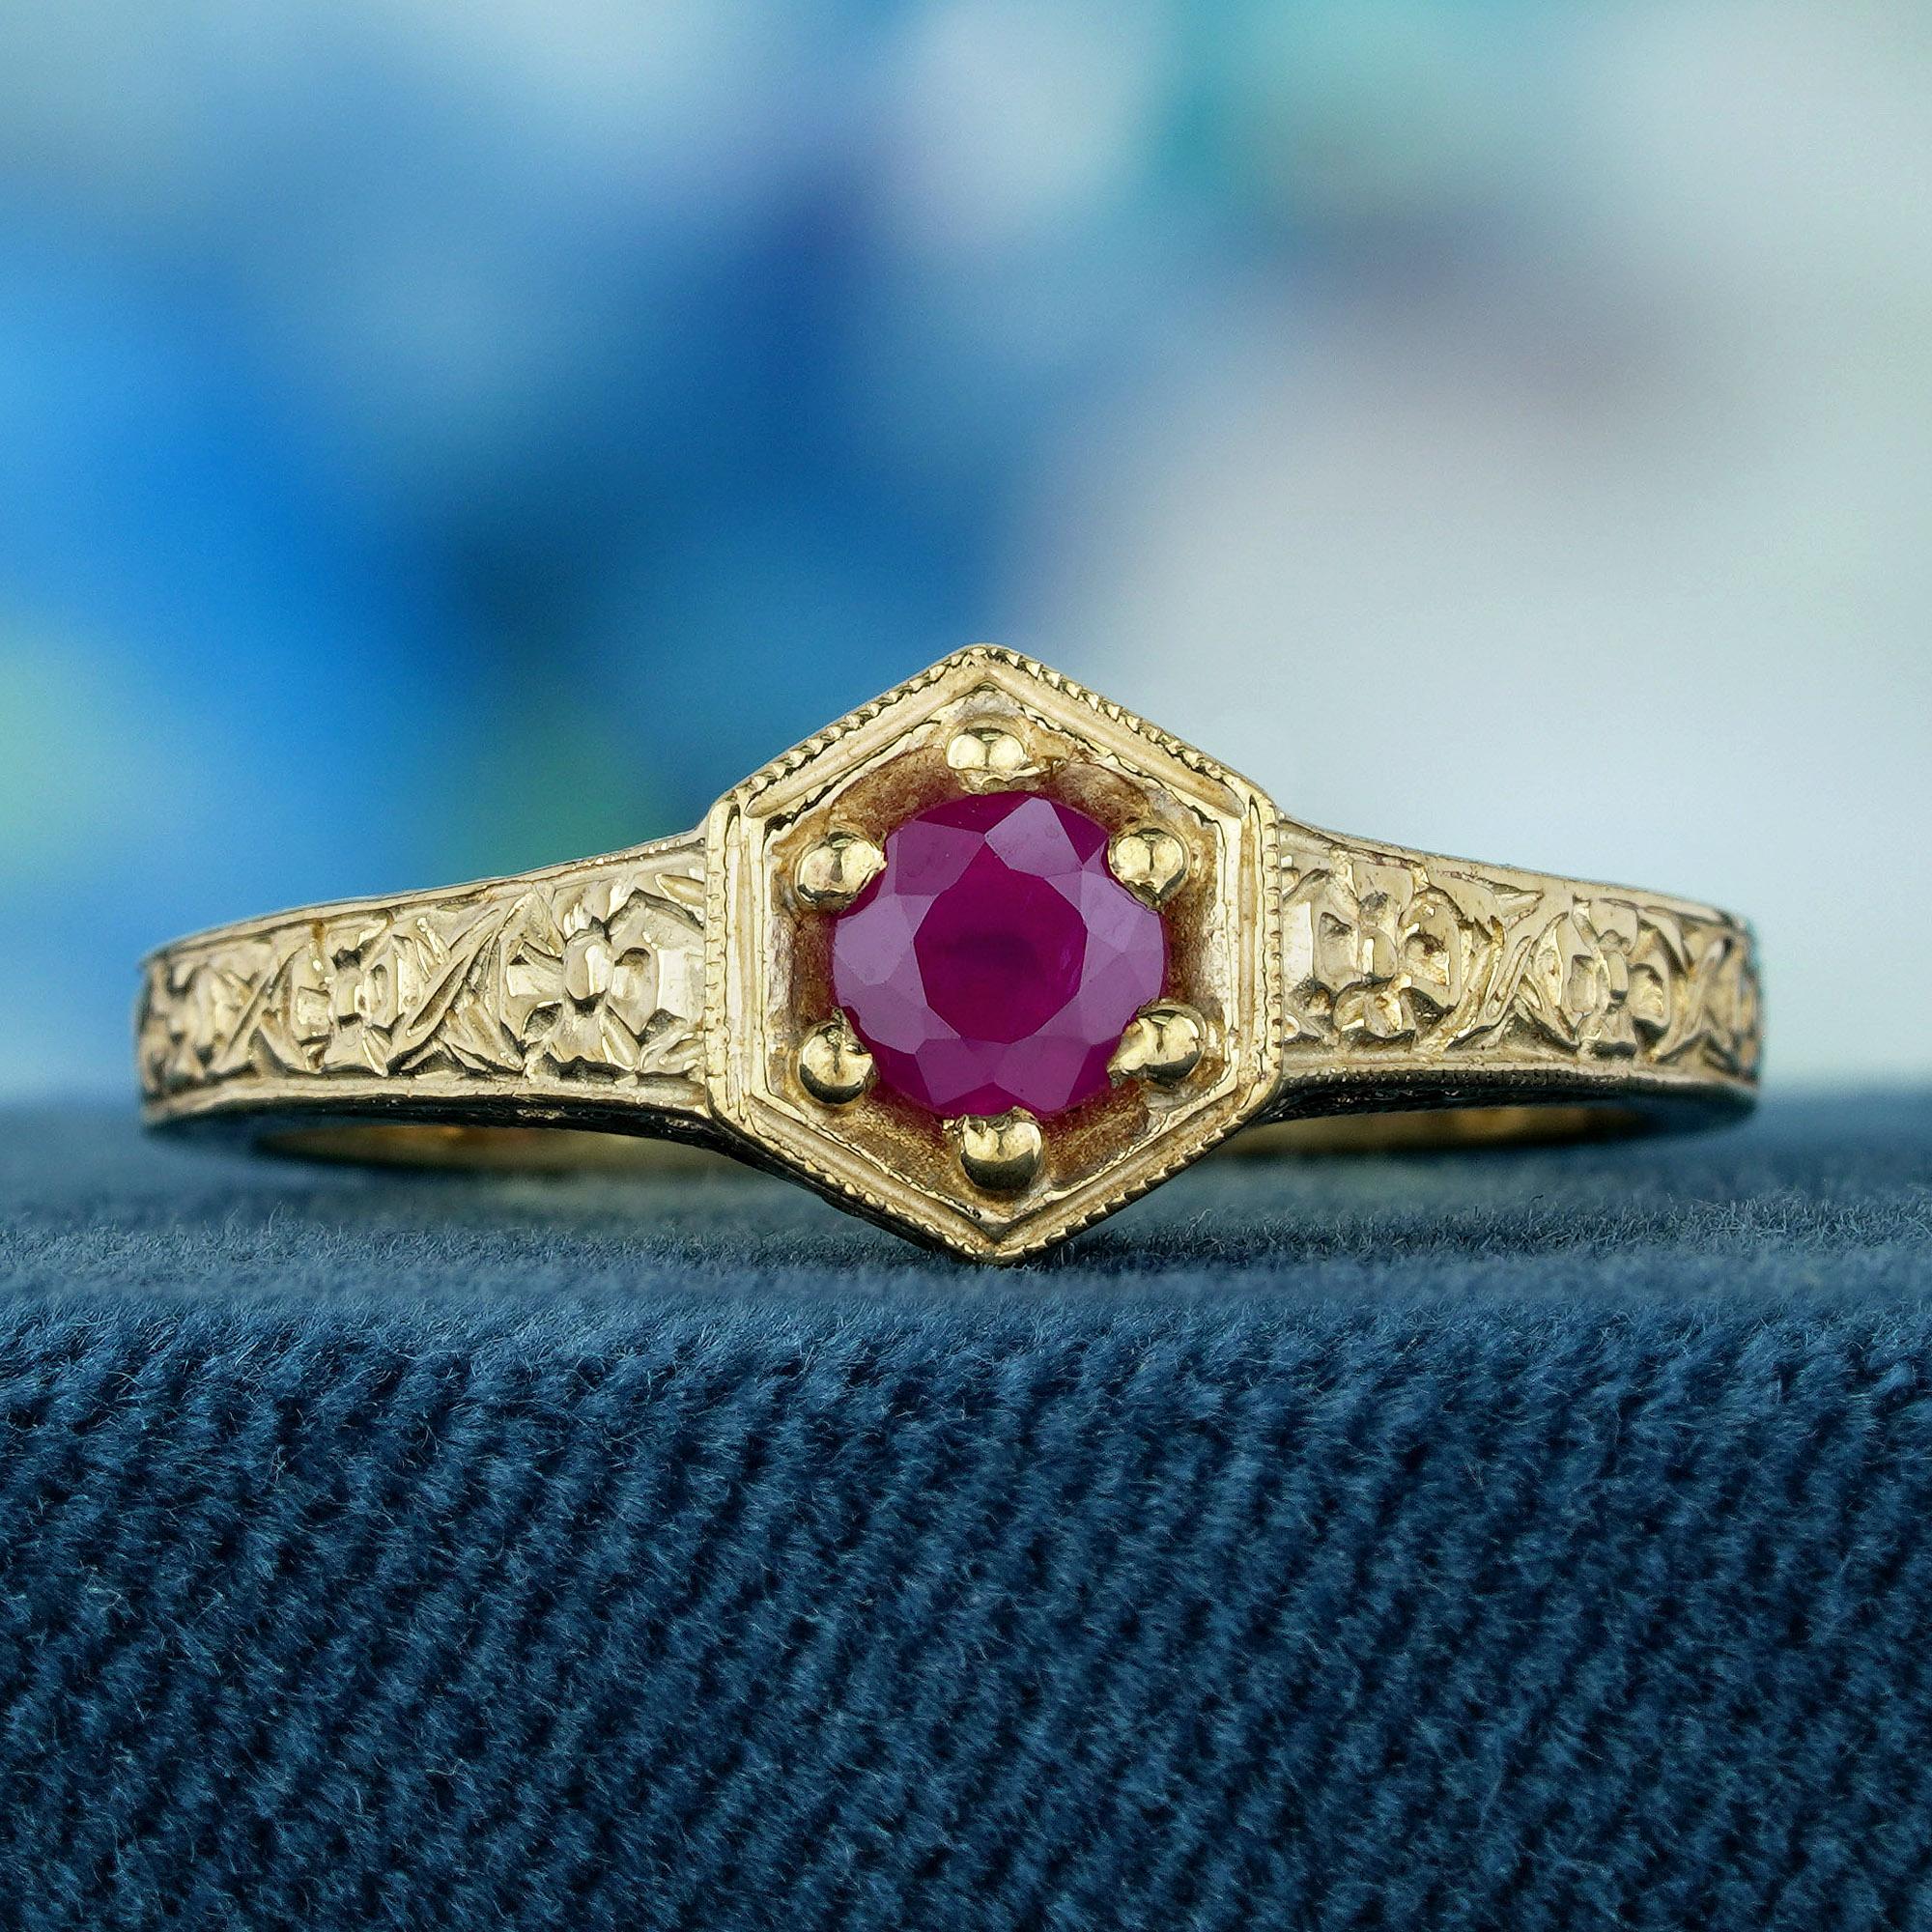 A vintage floral-inspired ring. The ring is made of yellow gold and features a round-cut gemstone in the octagonal frame on the center of the band, a masterpiece of exquisitely carved with delicate flower details across the band. It speaks of